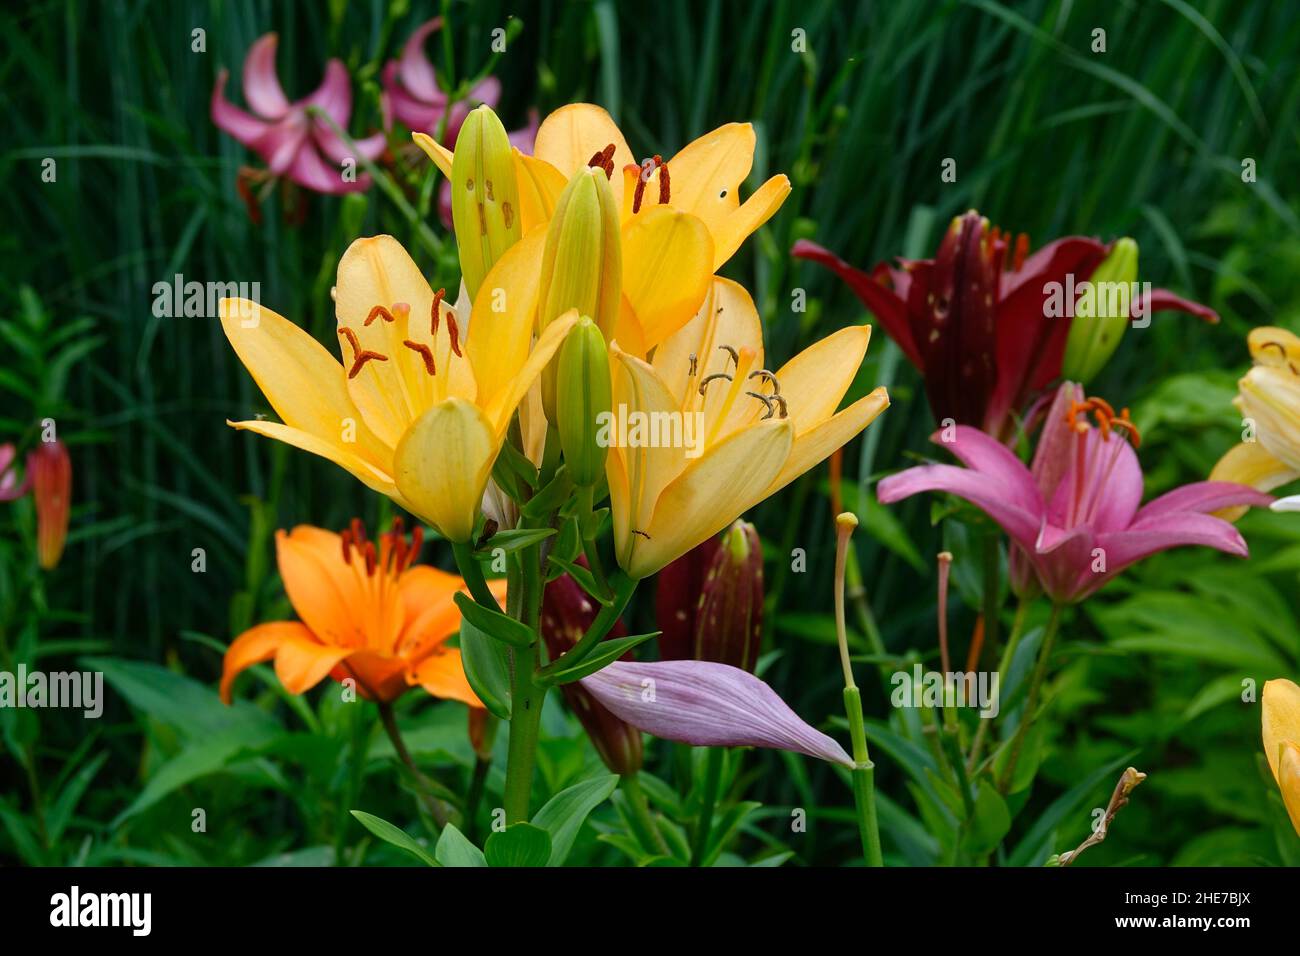 Cluster of Colorful Hybrid Lilies in a Garden, Combination of Peach Yellow Menorca Lily, Orange Brunello Lily, Burgundy Lily, Pink Lily, Tiny Ghost Stock Photo